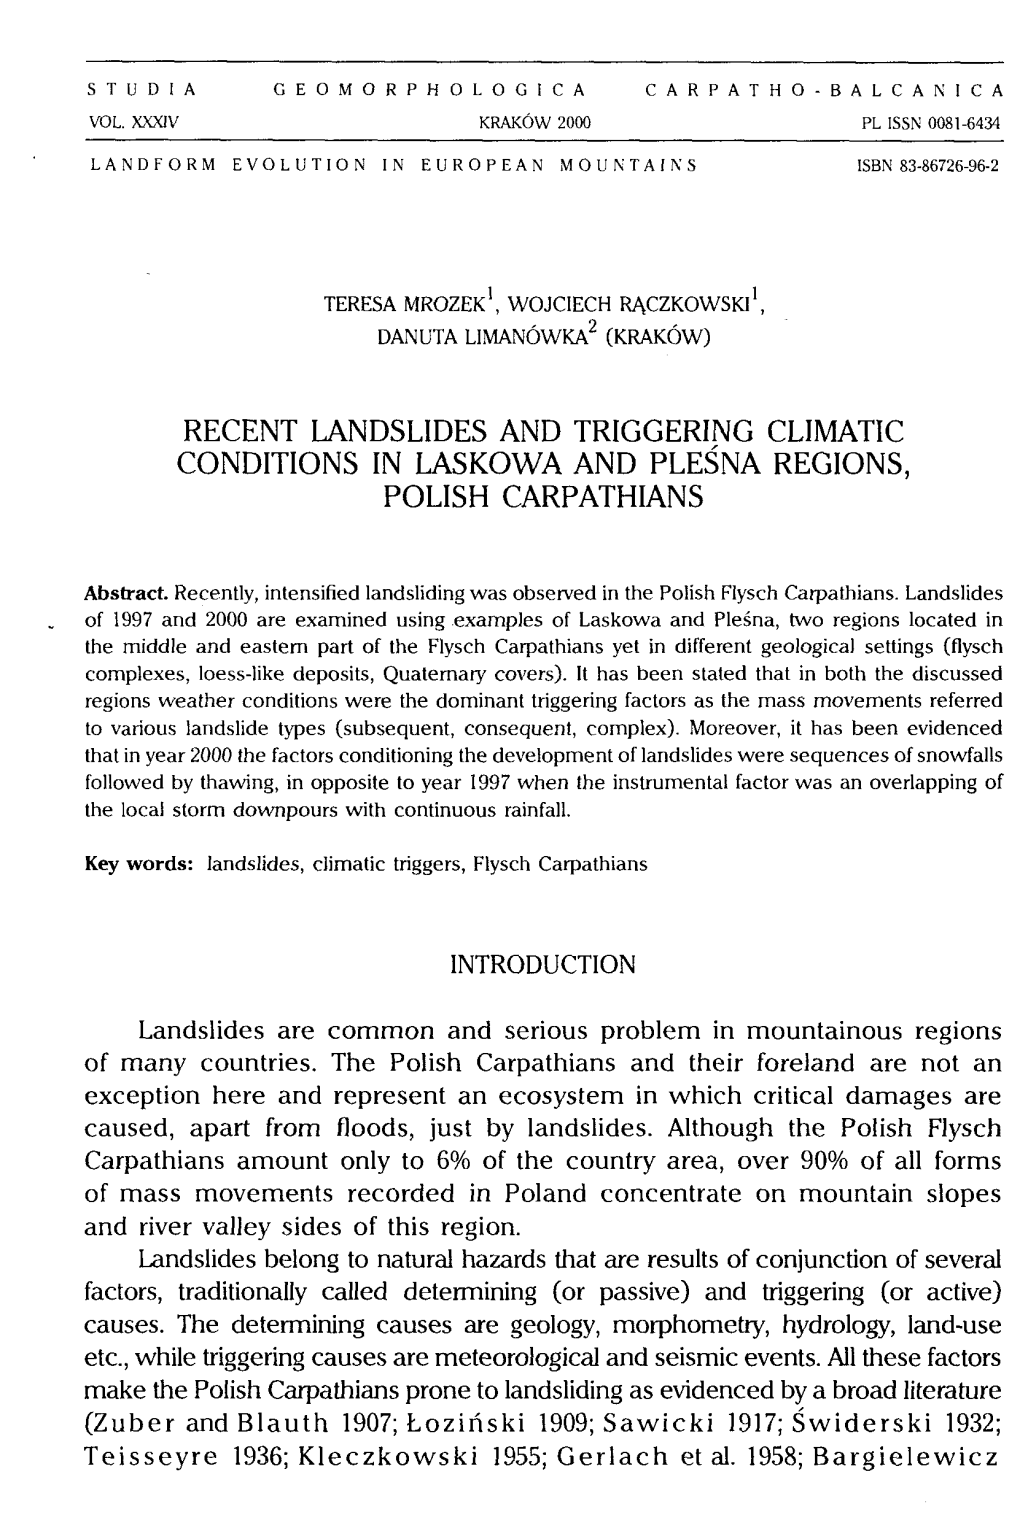 Recent Iandslides and Triggering Climatic Conditions in Laskowa and Pleśna Regions, Polish Carpathians